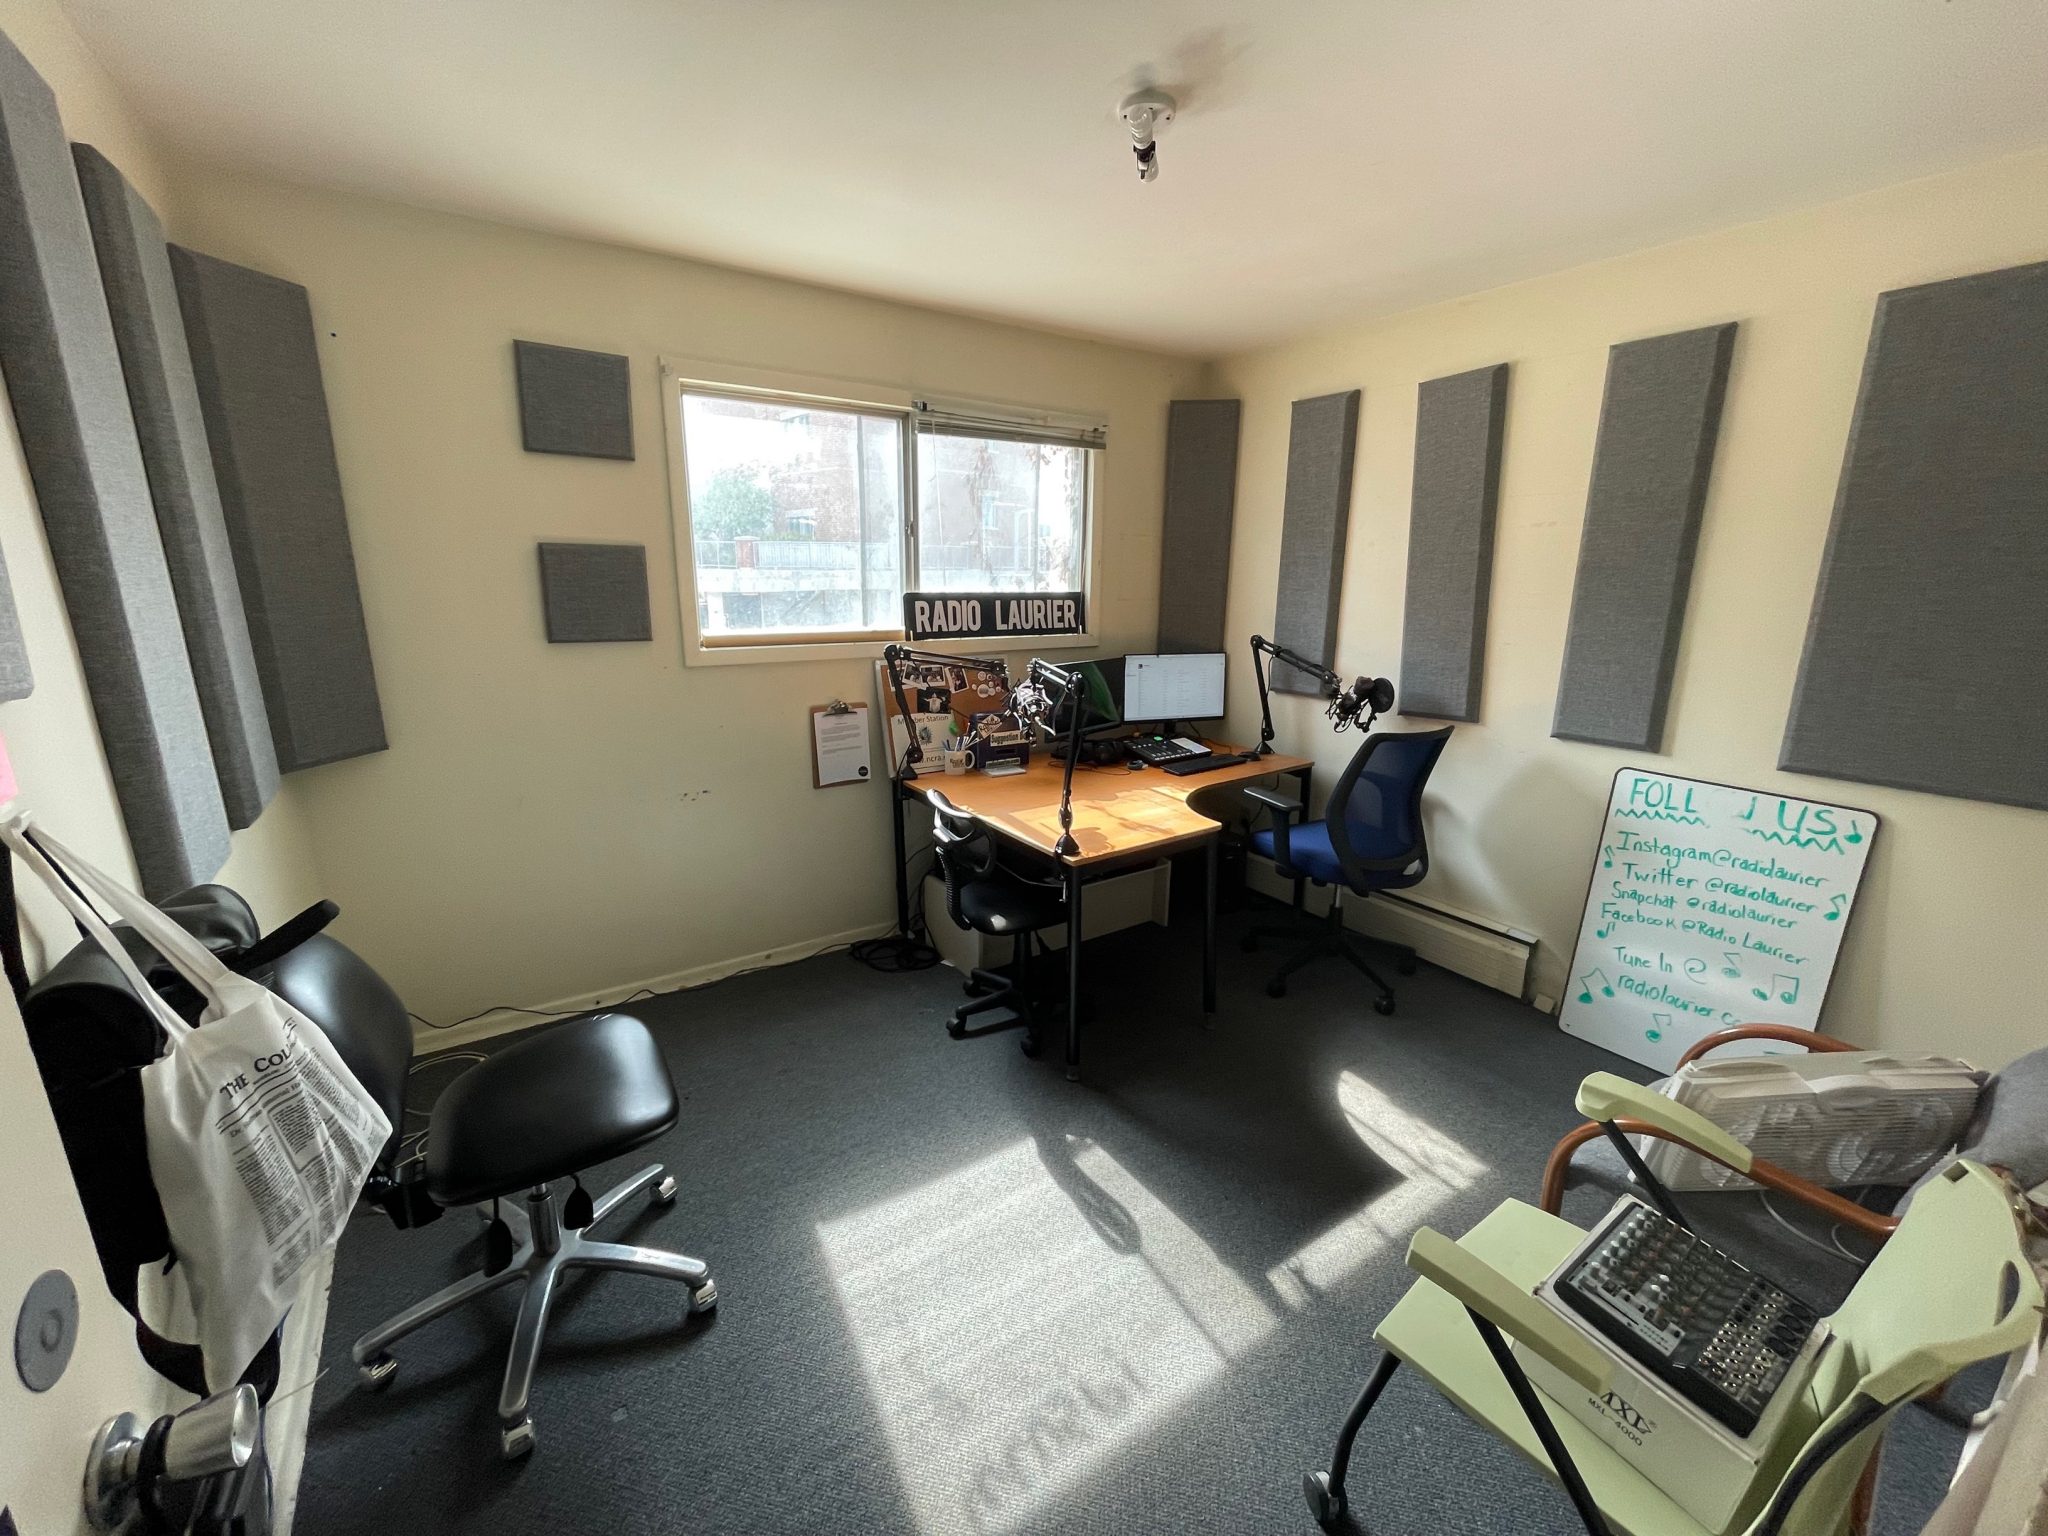 a large room with a chair in one corner and a desk with a computer diagonal from it. the walls also have medium grey rectangles to assisst with soundproofing and reducing echo